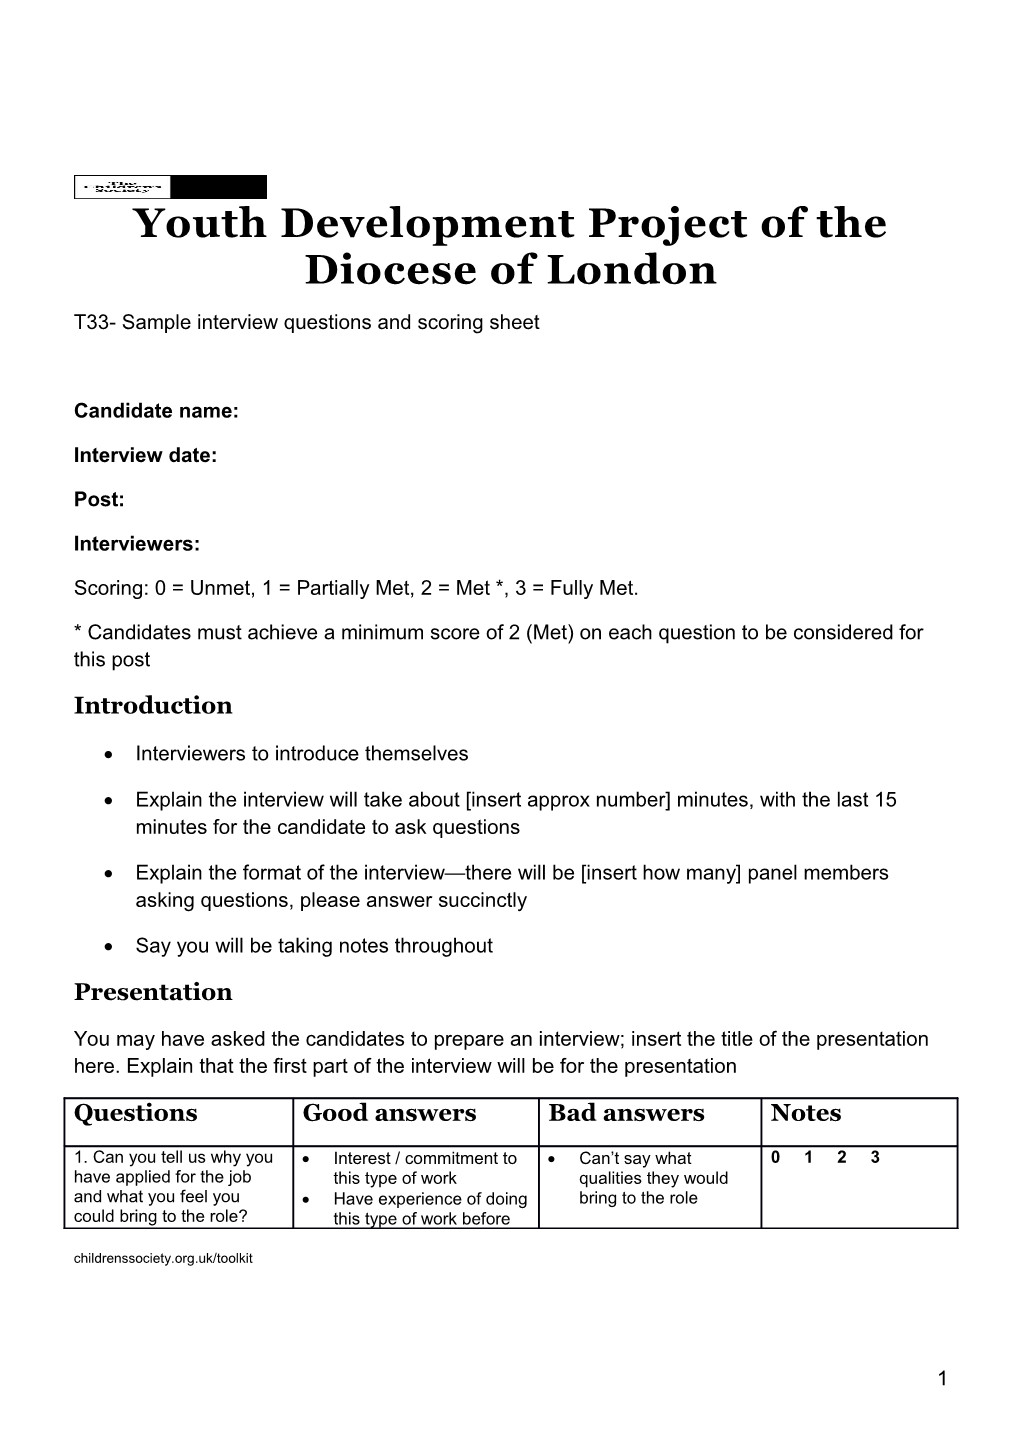 Youth Development Project of the Diocese of London